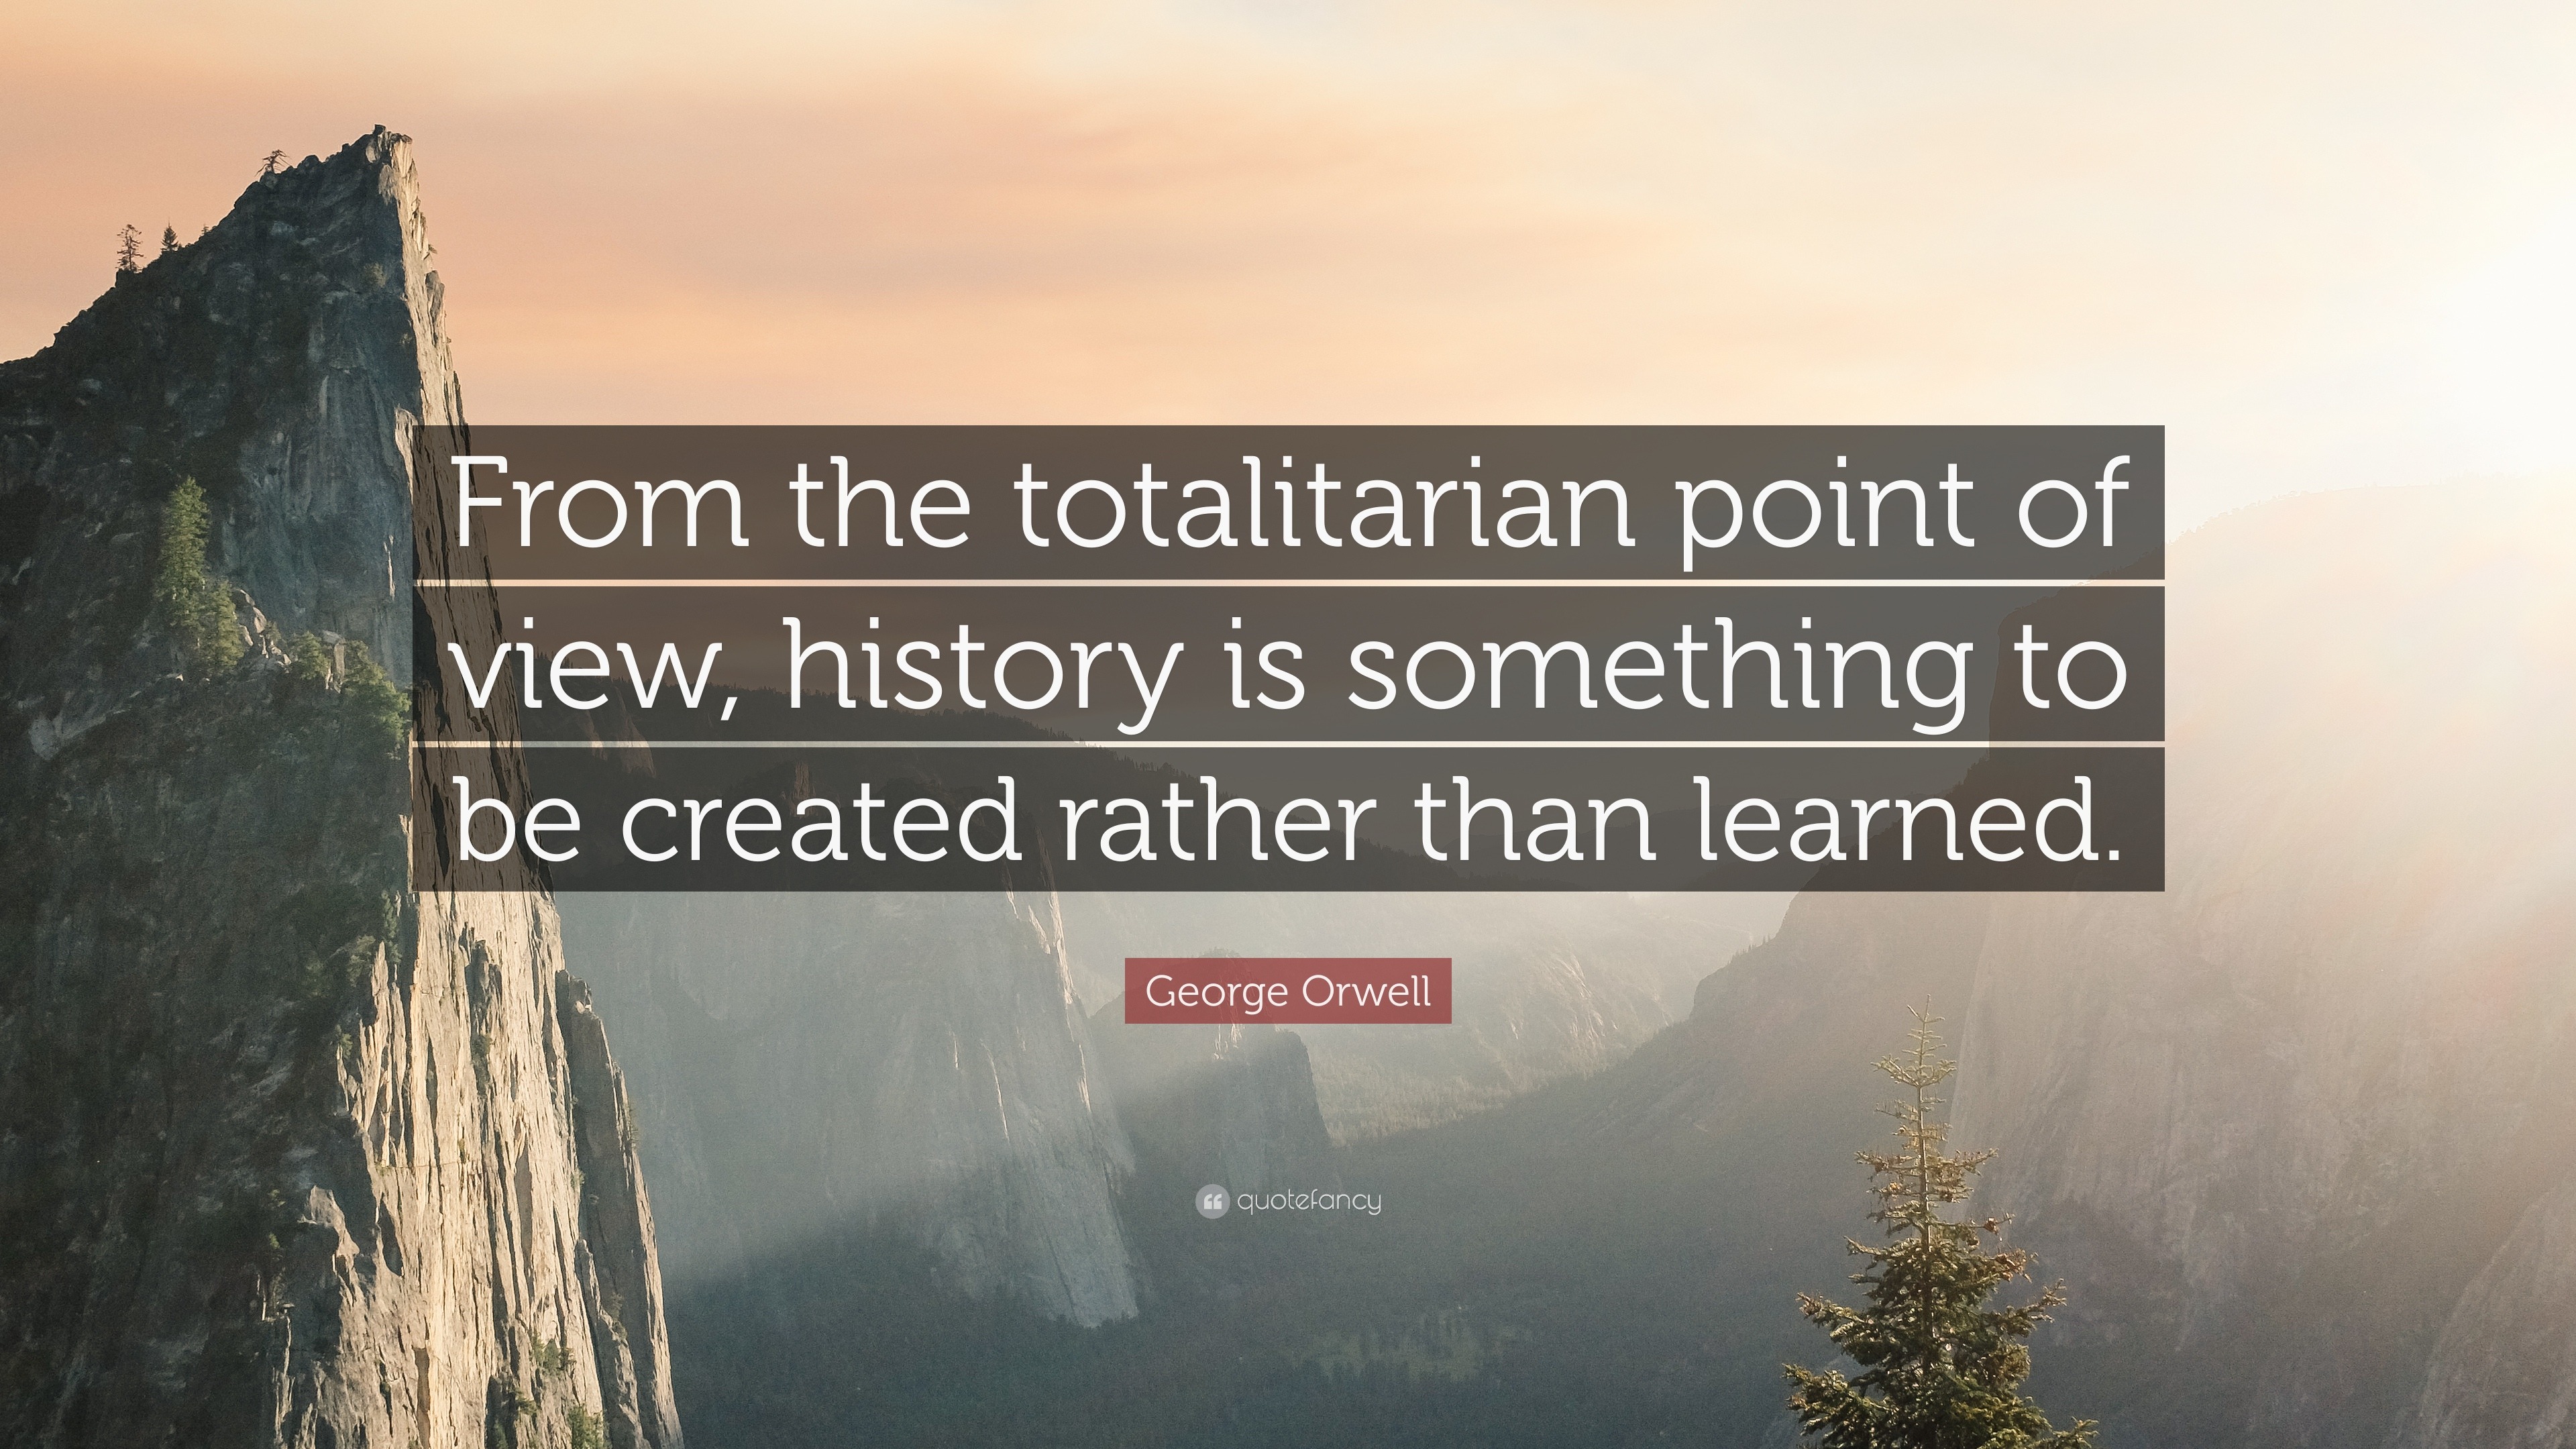 George Orwell Quote: "From the totalitarian point of view, history is something to be created ...